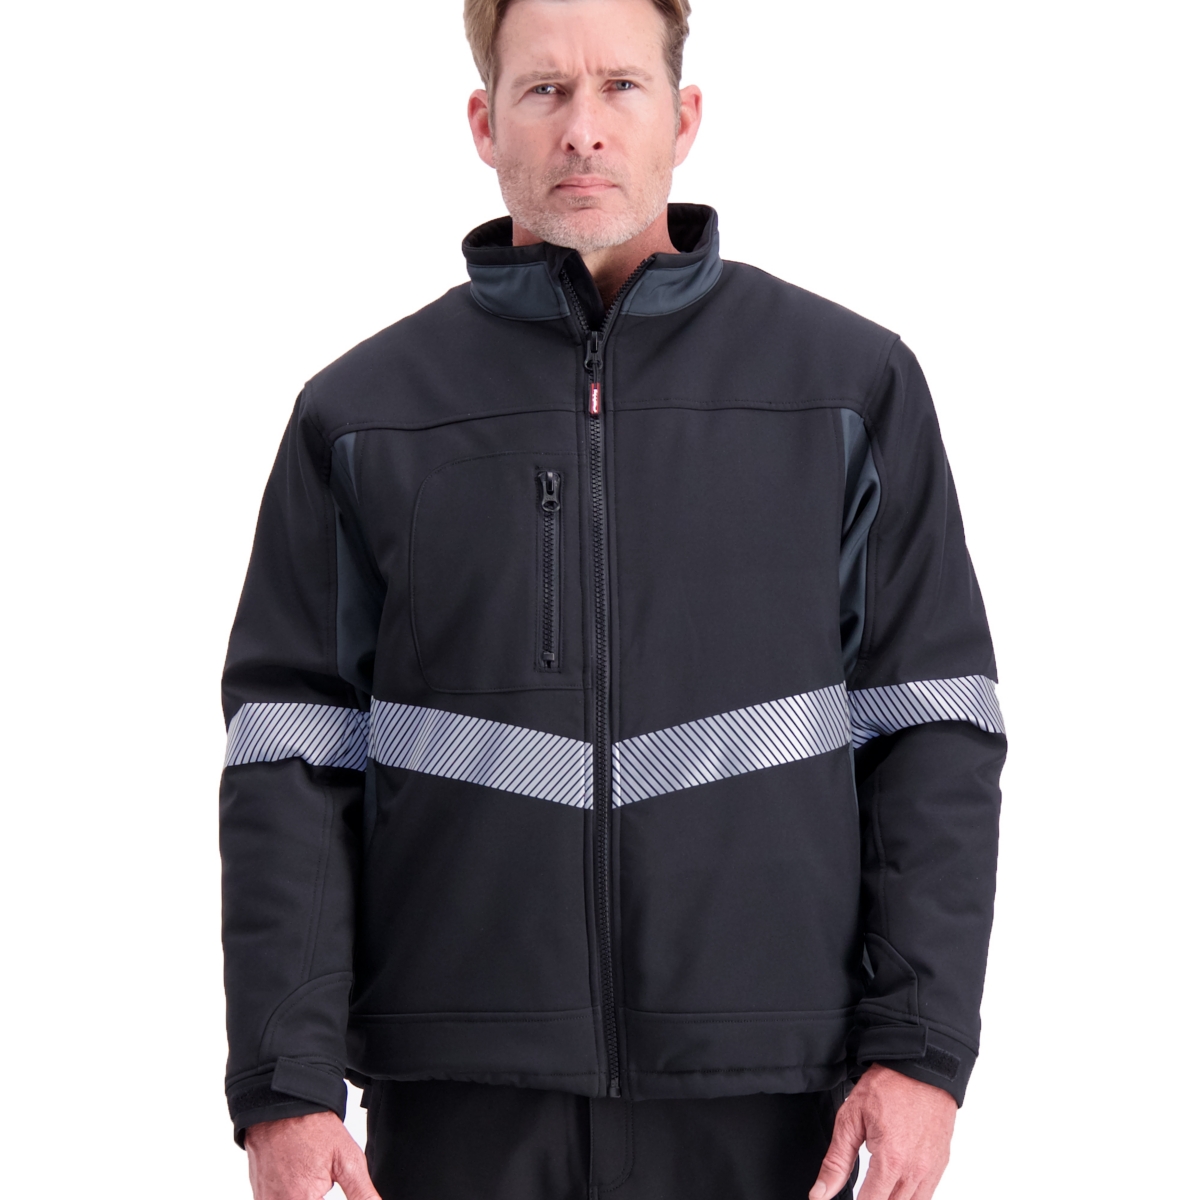 Men's Enhanced Visibility Insulated Softshell Jacket with Reflective Tape - Black